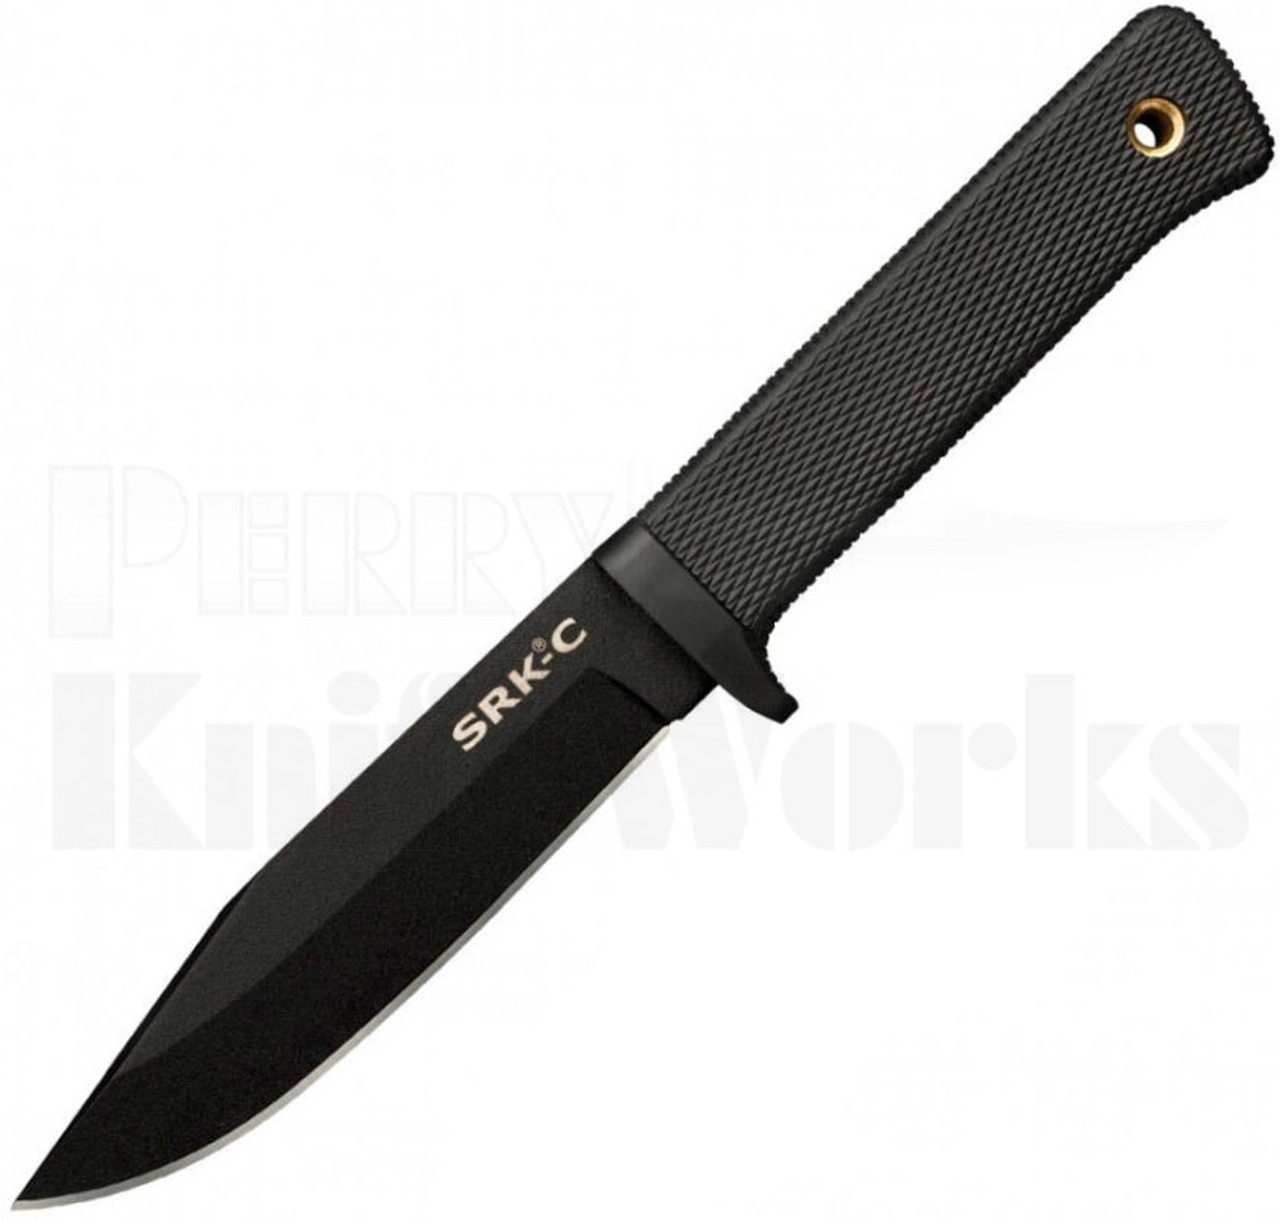 Cold Steel SRK Compact Search Rescue Fixed Blade Knife